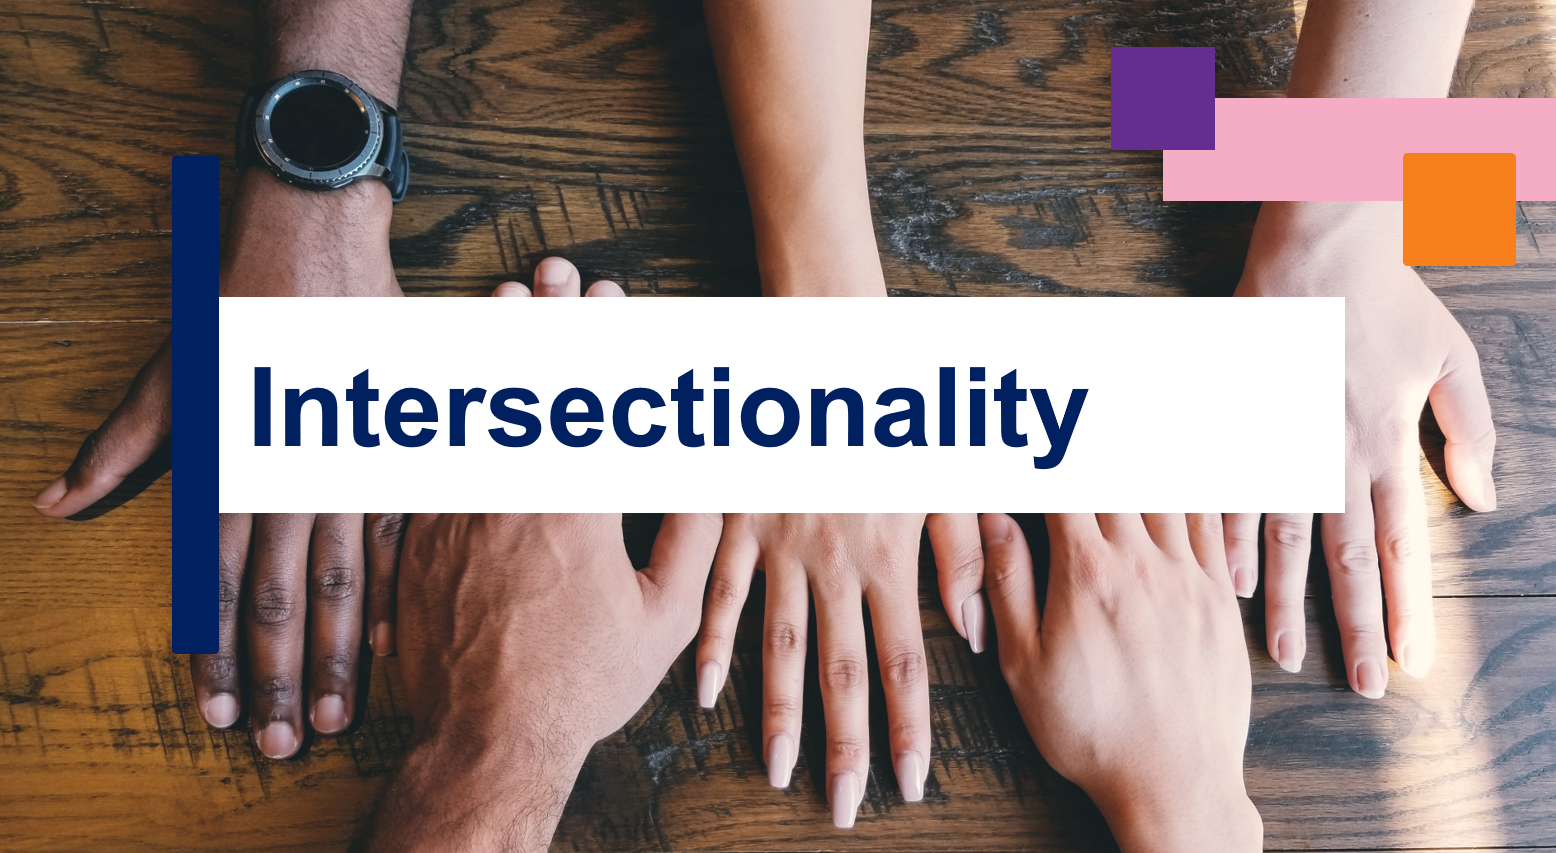 Insights Training Session Image showing title, "Intersectionality" 